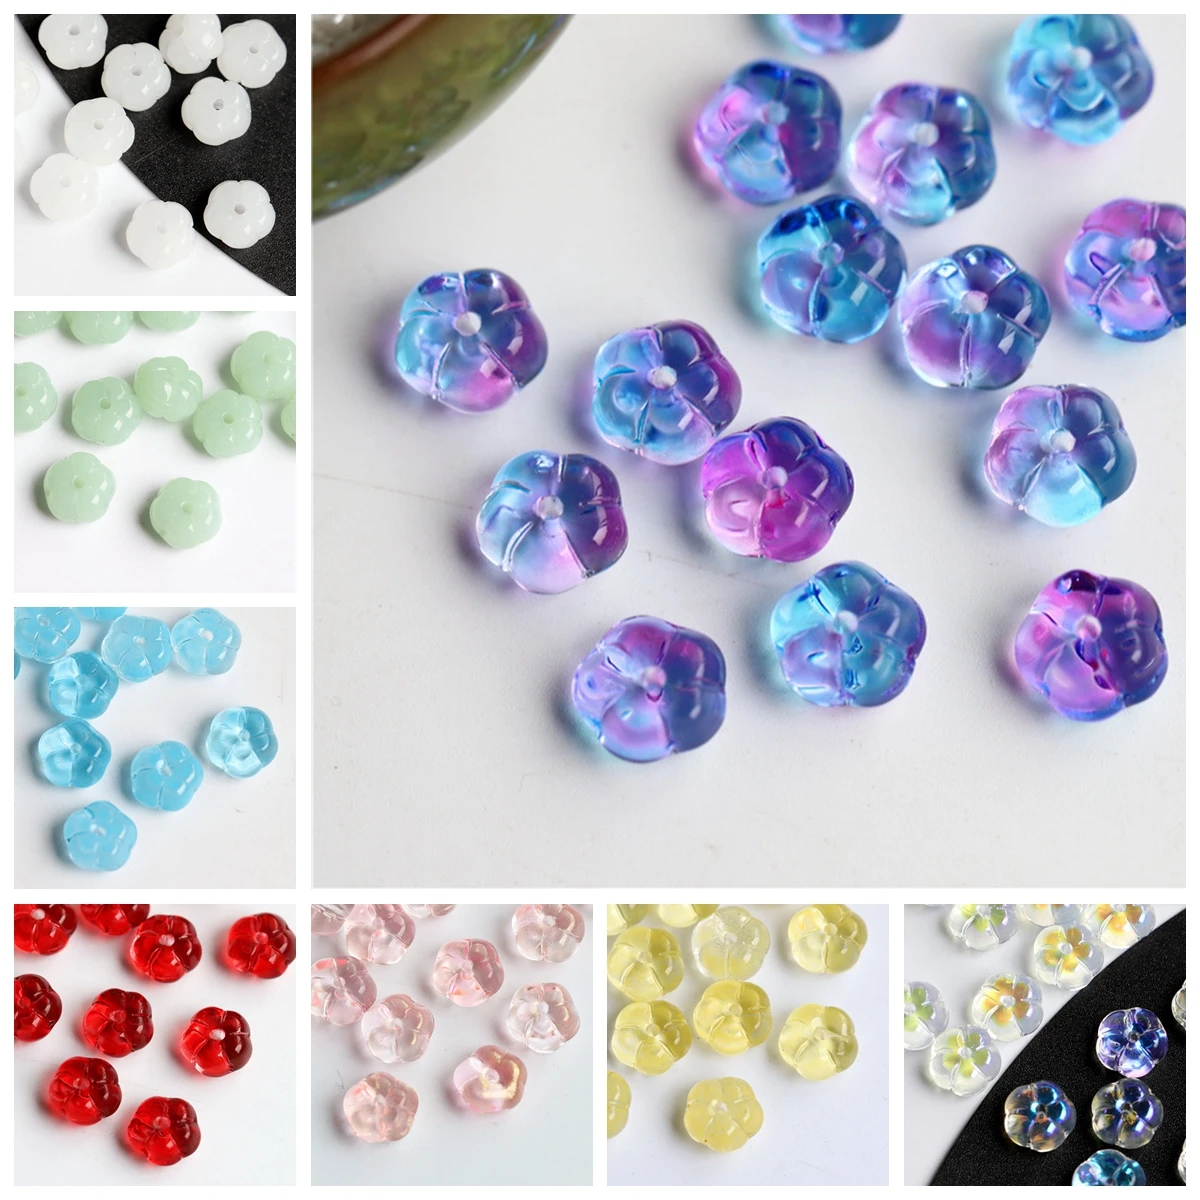 10pcs 9.5mm Flat Round Flower Pumpkin Shape Crystal Lampwork Glass Loose Beads for Jewelry Making 5pcs 14mm flat round chinese characters double happiness lampwork glass loose beads for jewelry making diy crafts findings